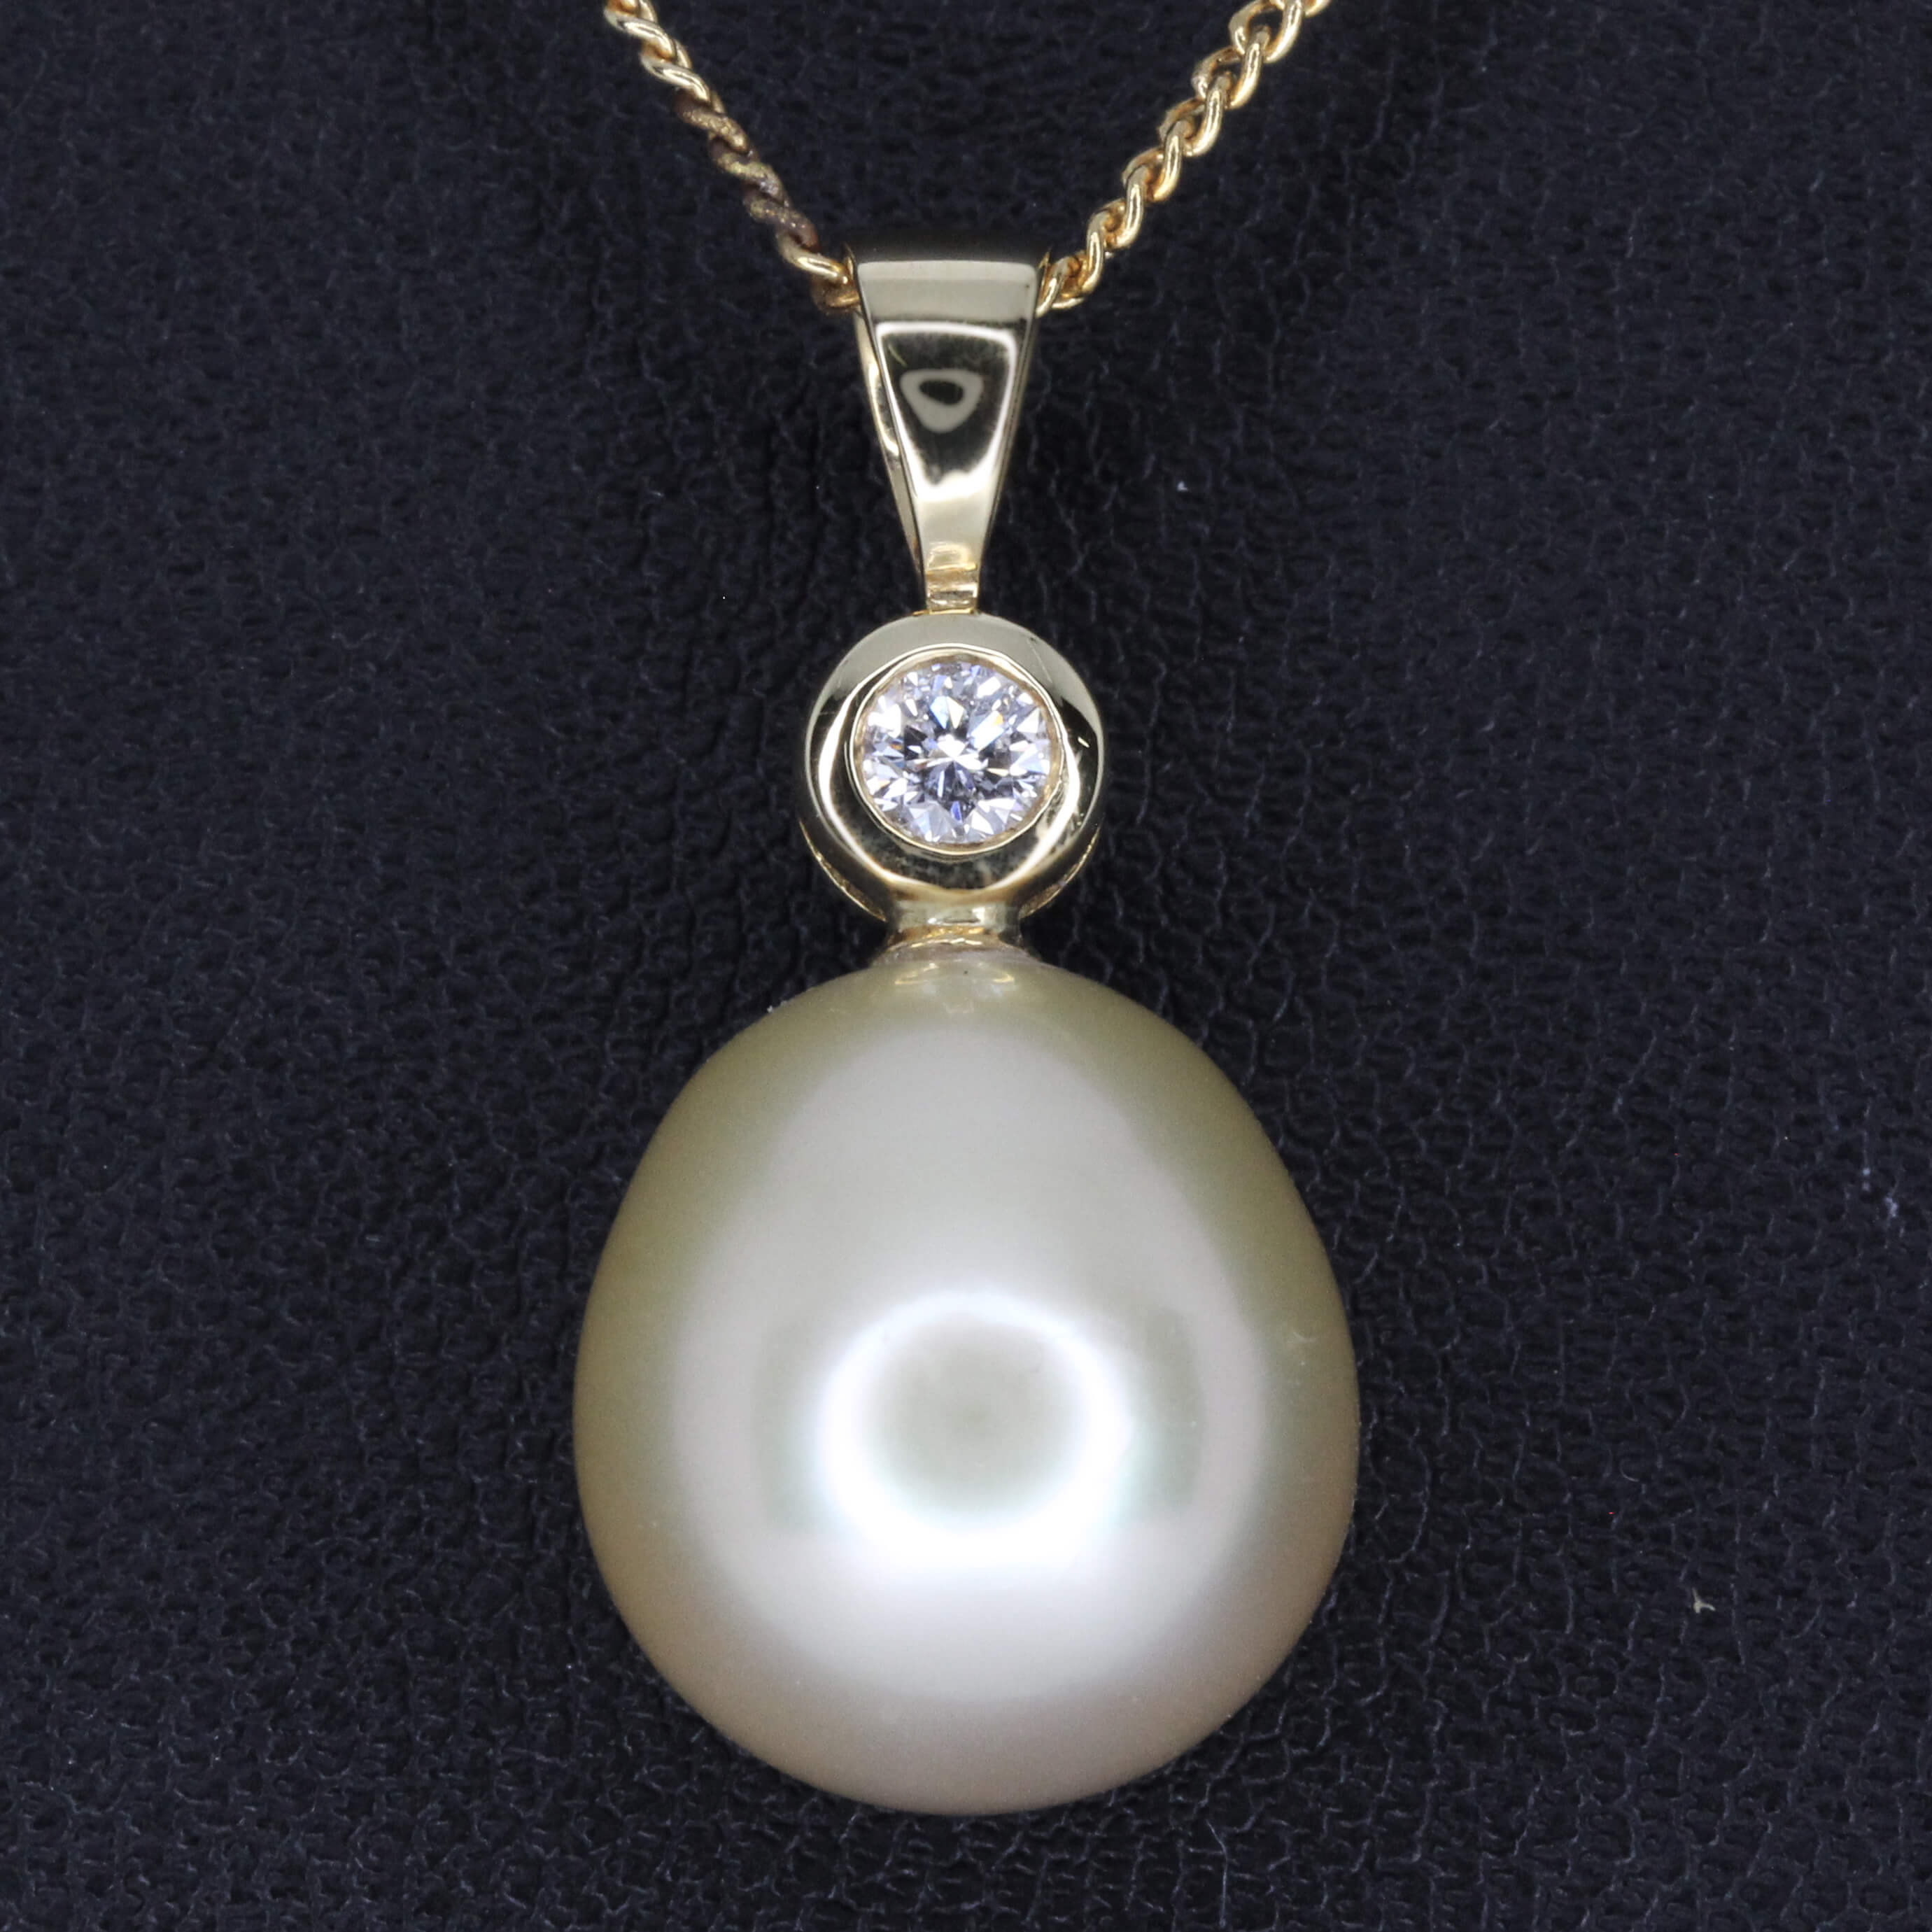 Golden South Sea Pearl Pendant with Diamonds set in 18ct Yellow Gold